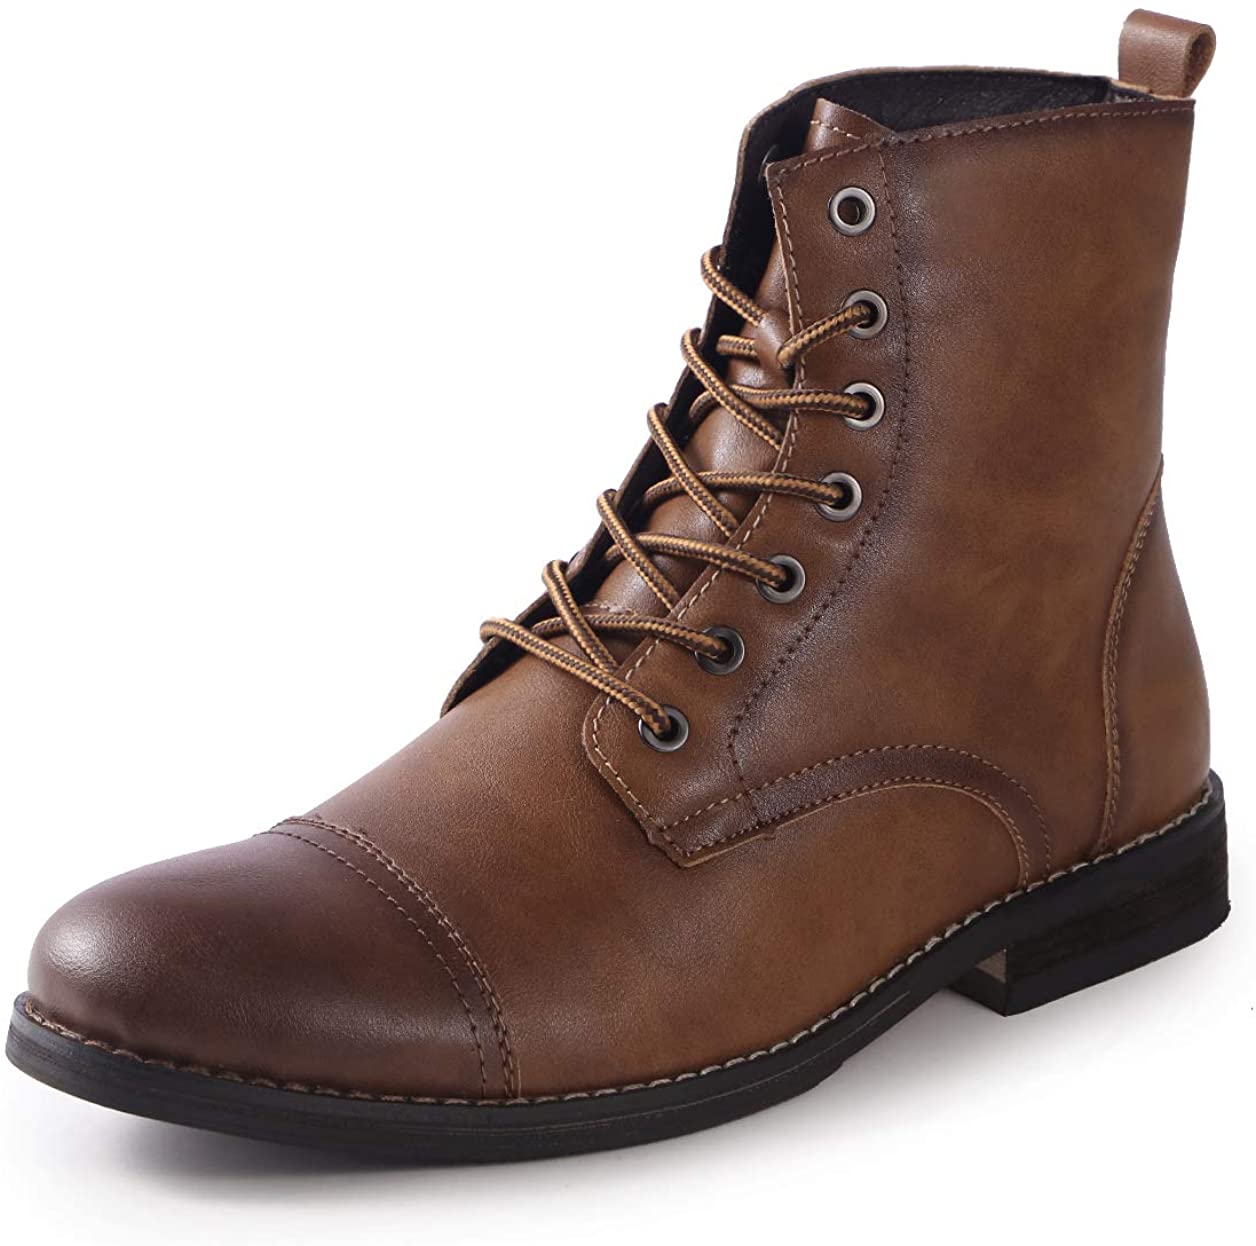 Mens Boots Combat Dress Fashion Lace up Motorcycle Boot